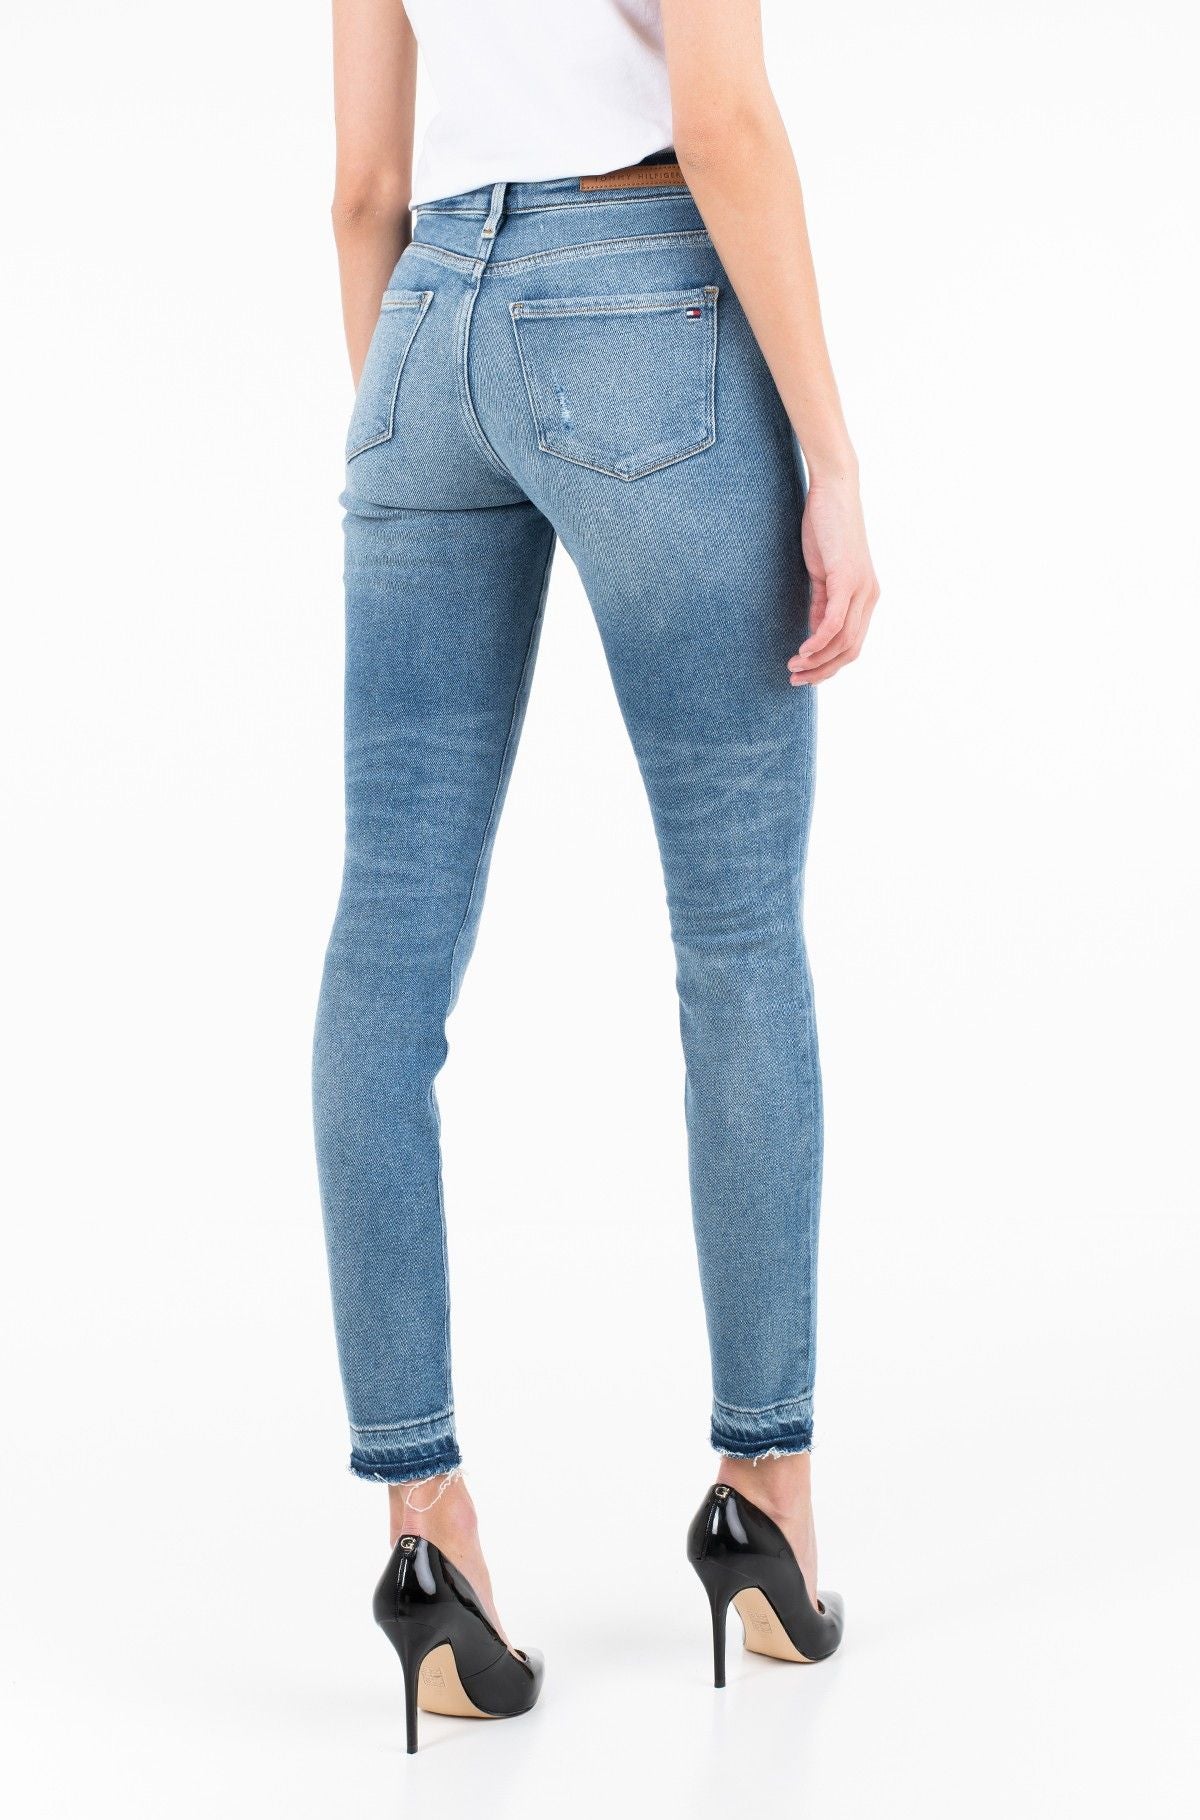 Chic Ankle Length Jeggings with Regular Waist